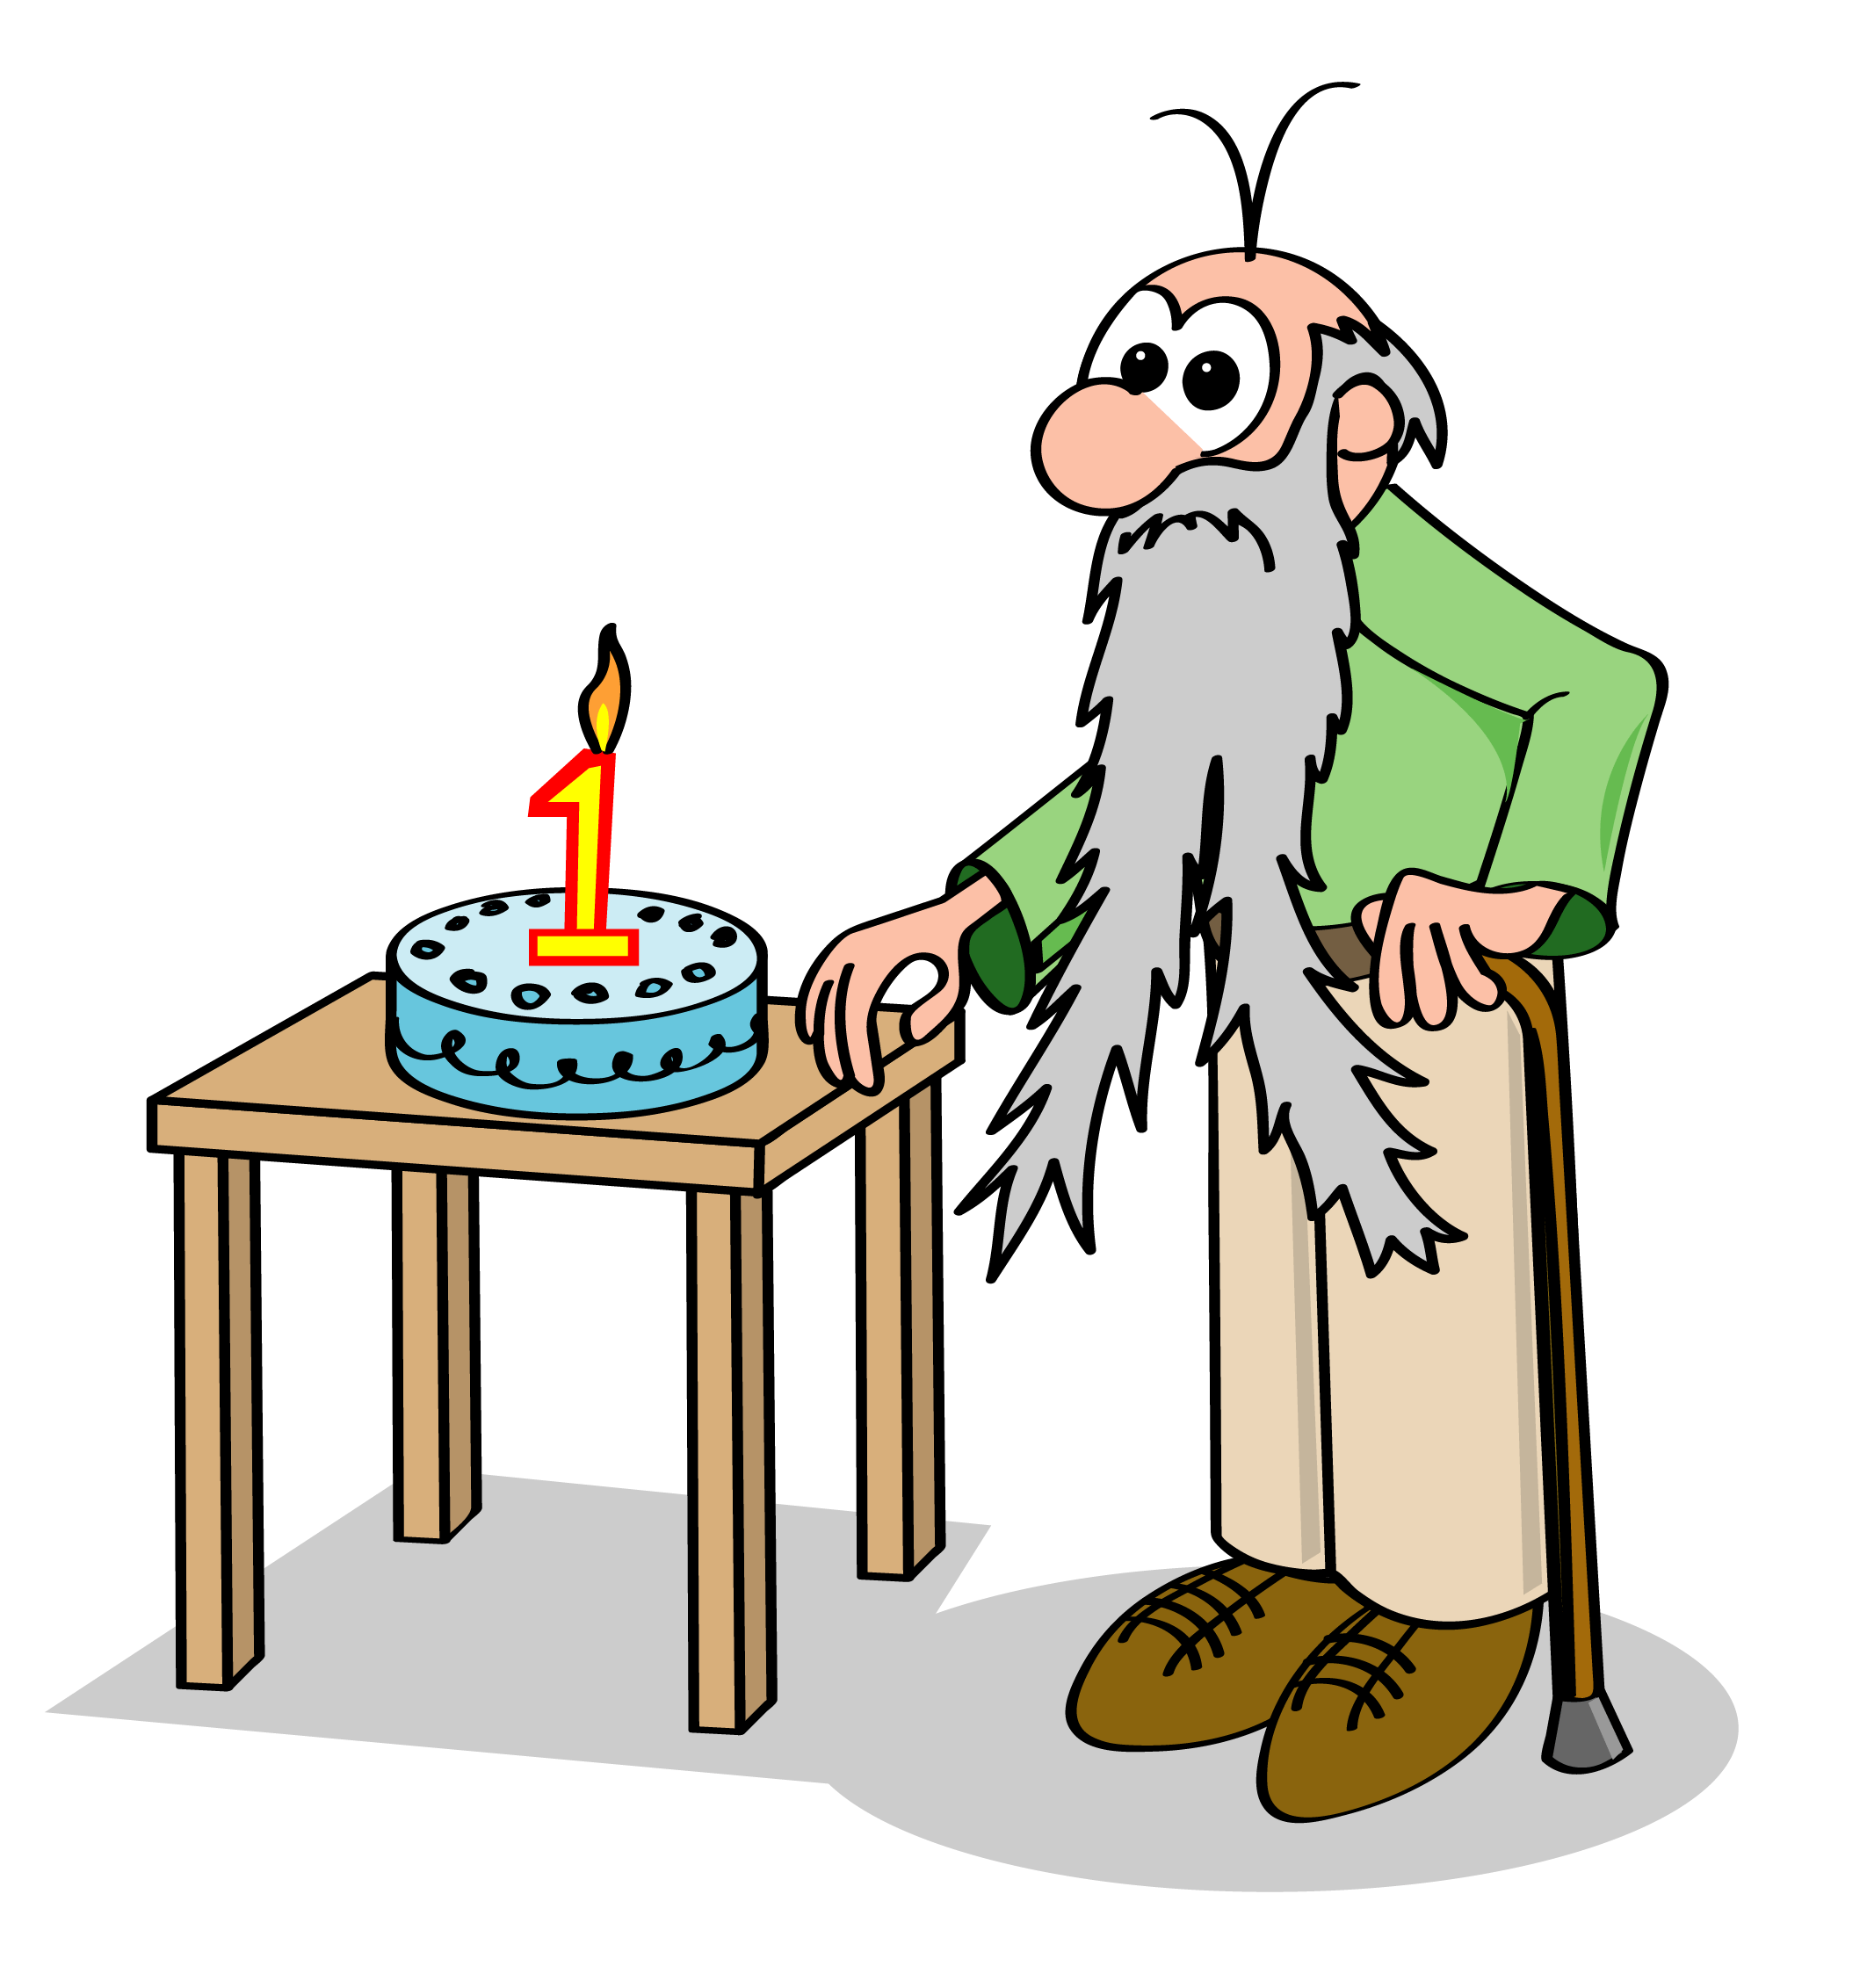 Old man with long gray beard and a cane wearing a green shirt. The man stands next to a small table with a blue birthday cake with a lit #1 candle.